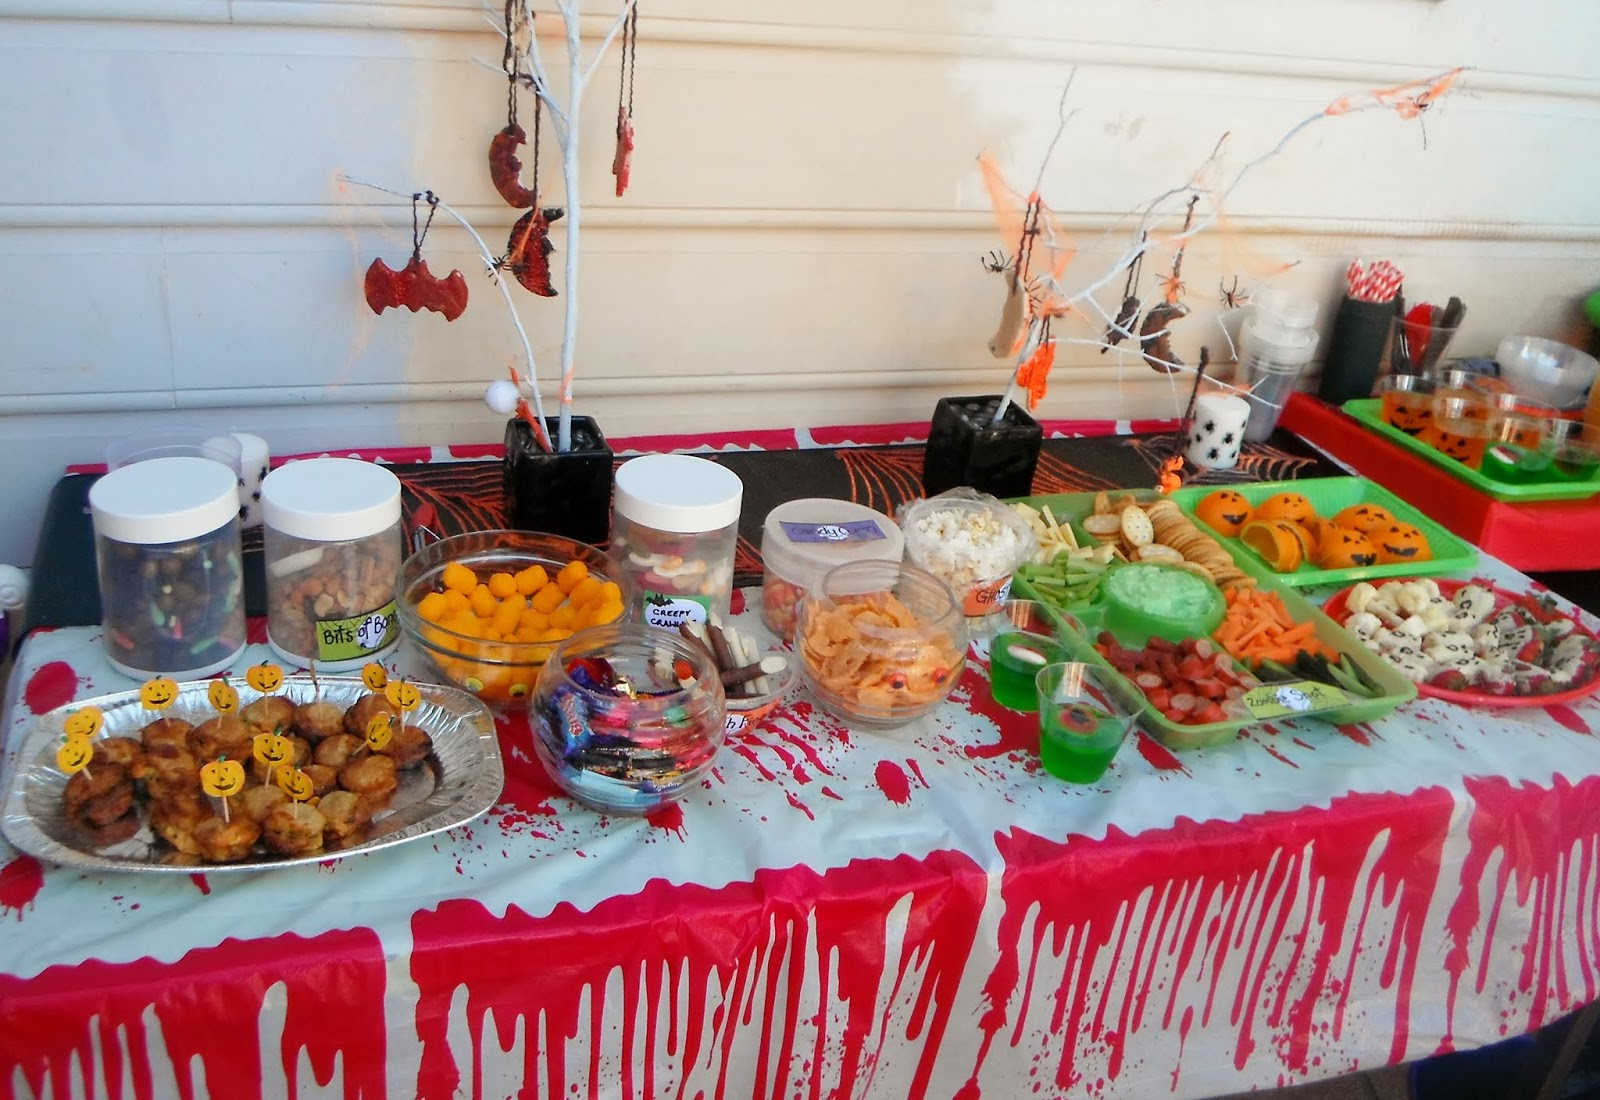 Easy Halloween Party Food Ideas
 Adventures at home with Mum Halloween Party Food